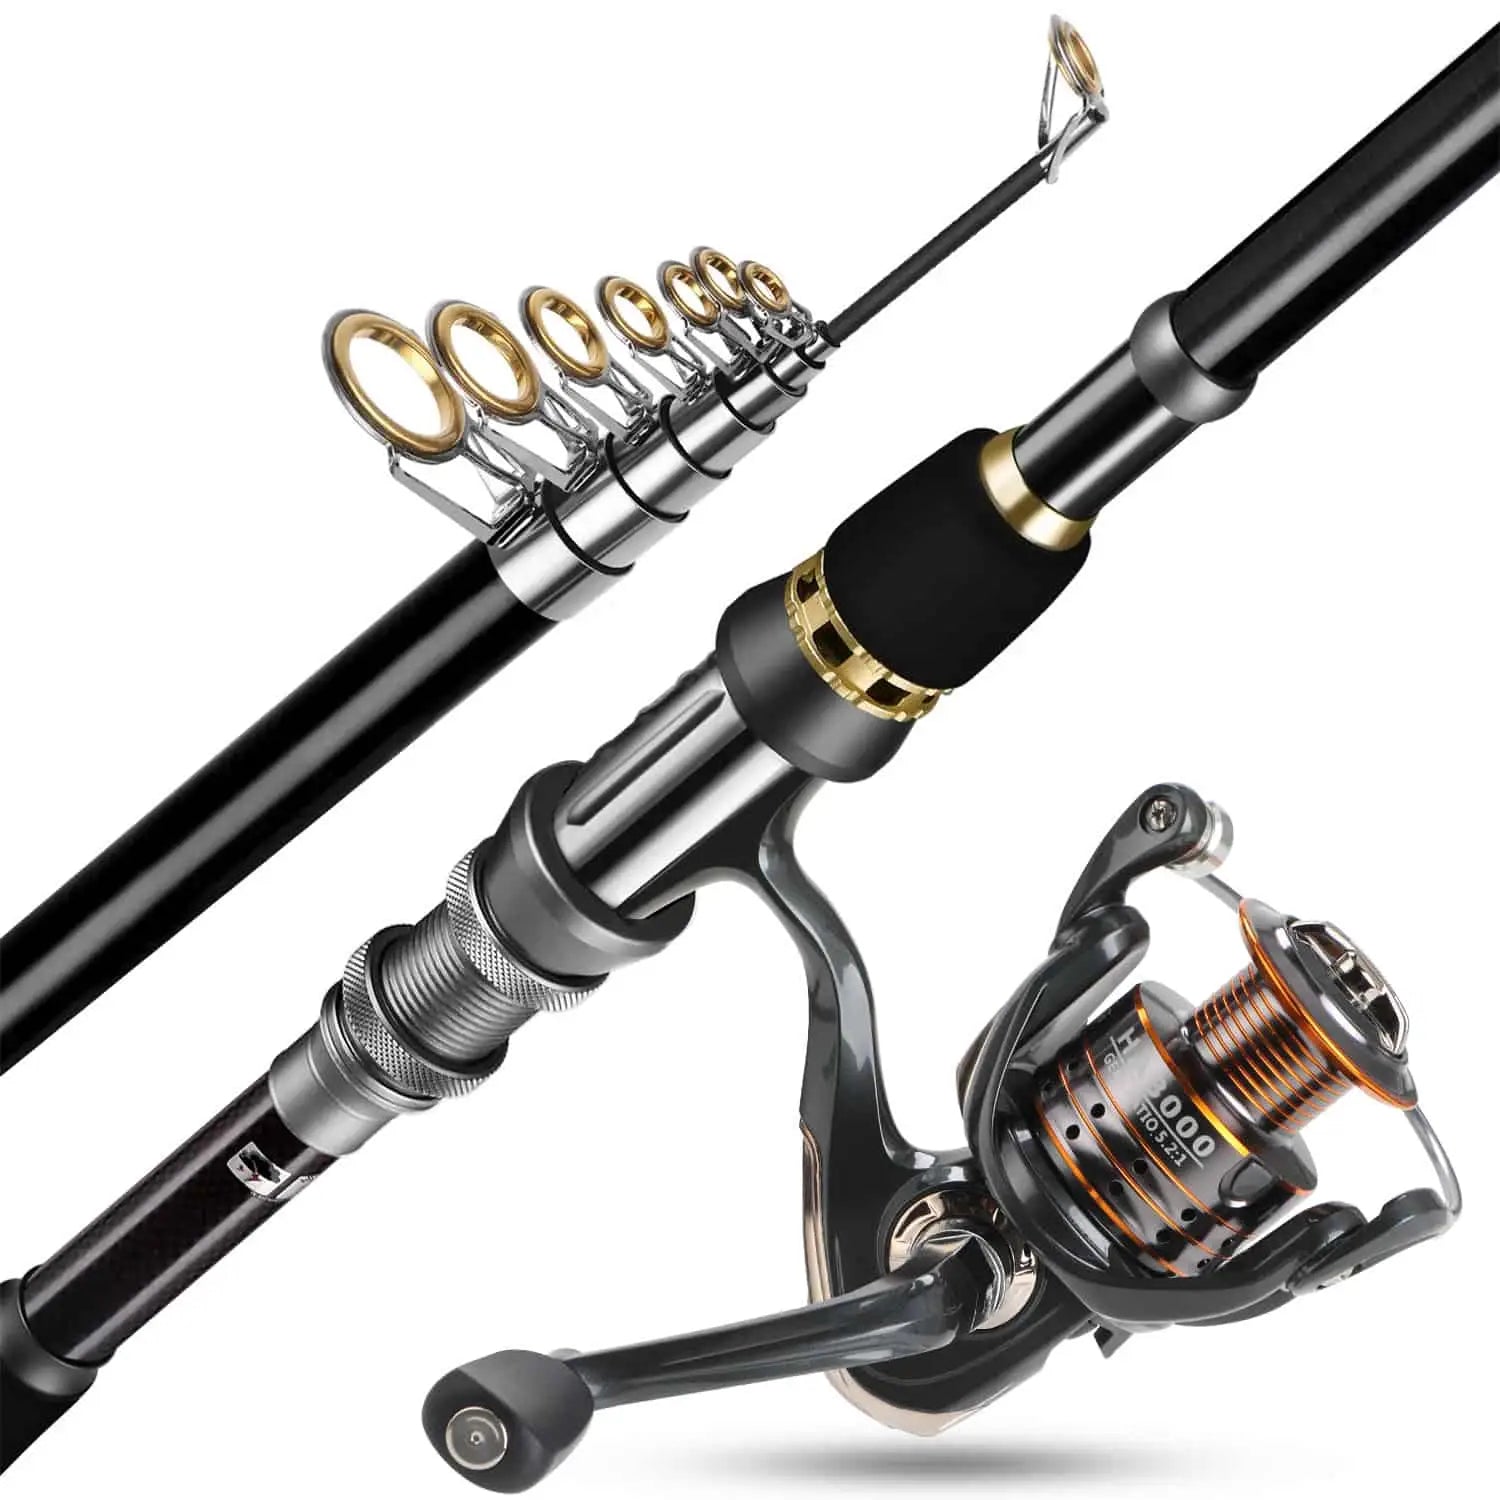 PLUSINNO Eagle Hunting Ⅱ Telescopic Fishing Rods and Reel Combos